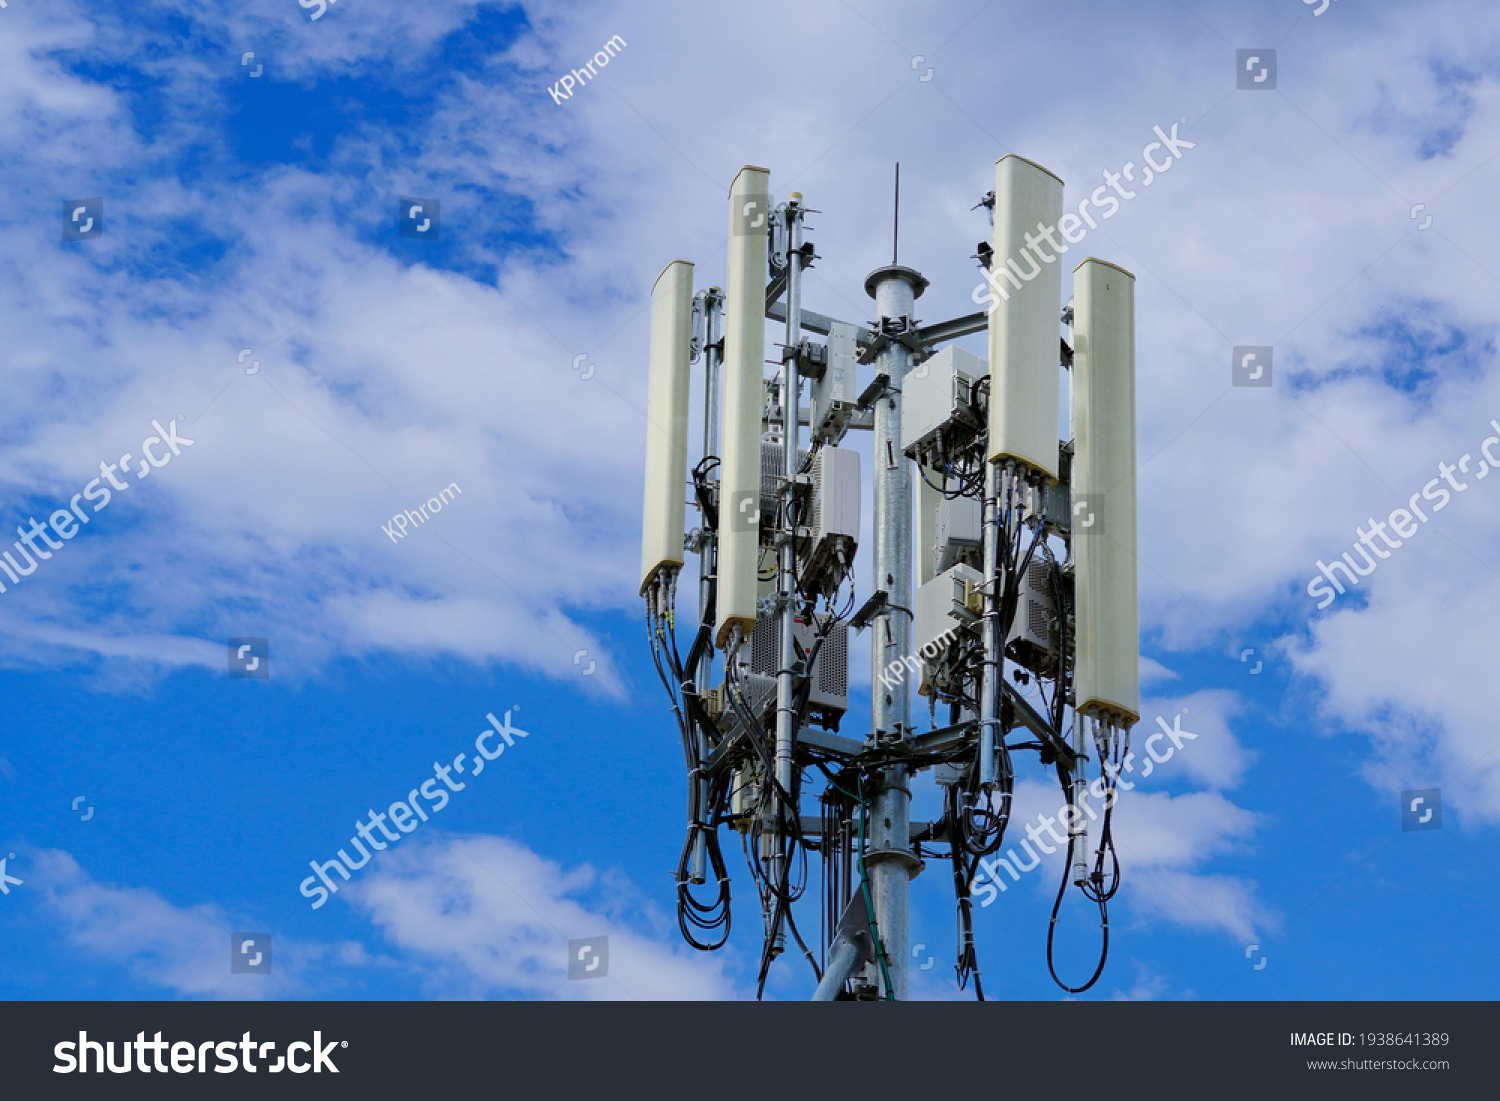 Telecommunication tower of 4G and 5G cellular. Macro Base Station. 5G radio network telecommunication equipment with radio modules and smart antennas mounted on a metal on cloulds sky background. #1938641389